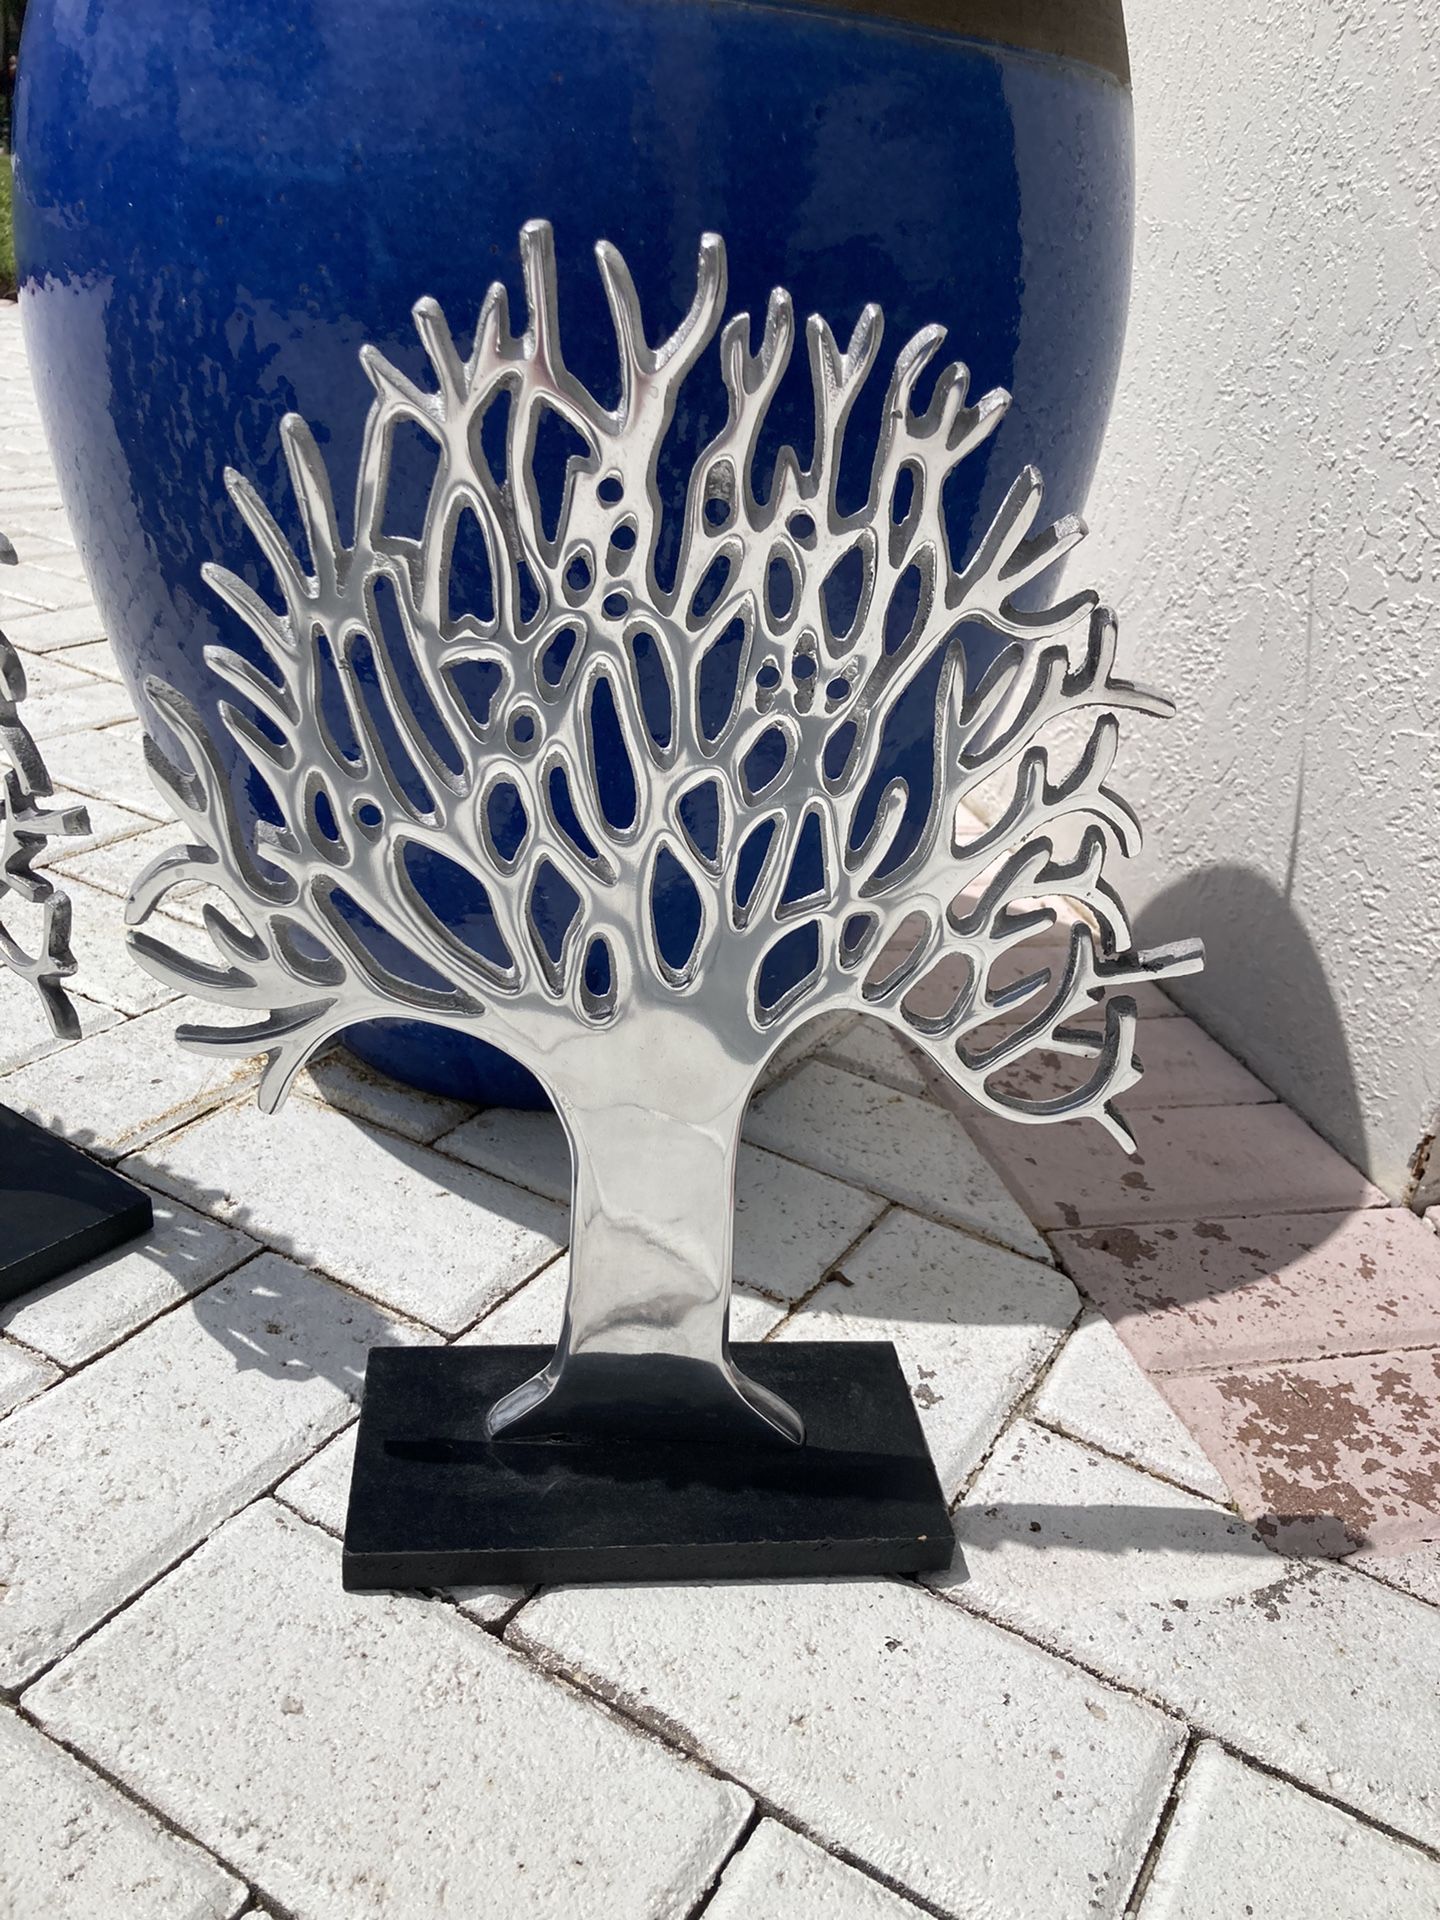 BIG 16” Tall X Almost 13” Wide Tree Of Life Statue $25. Silver Aluminum Metal On Black Wood Base. 2 Art Statue Bookends.  $25 For 1. Or Buy The Pair!